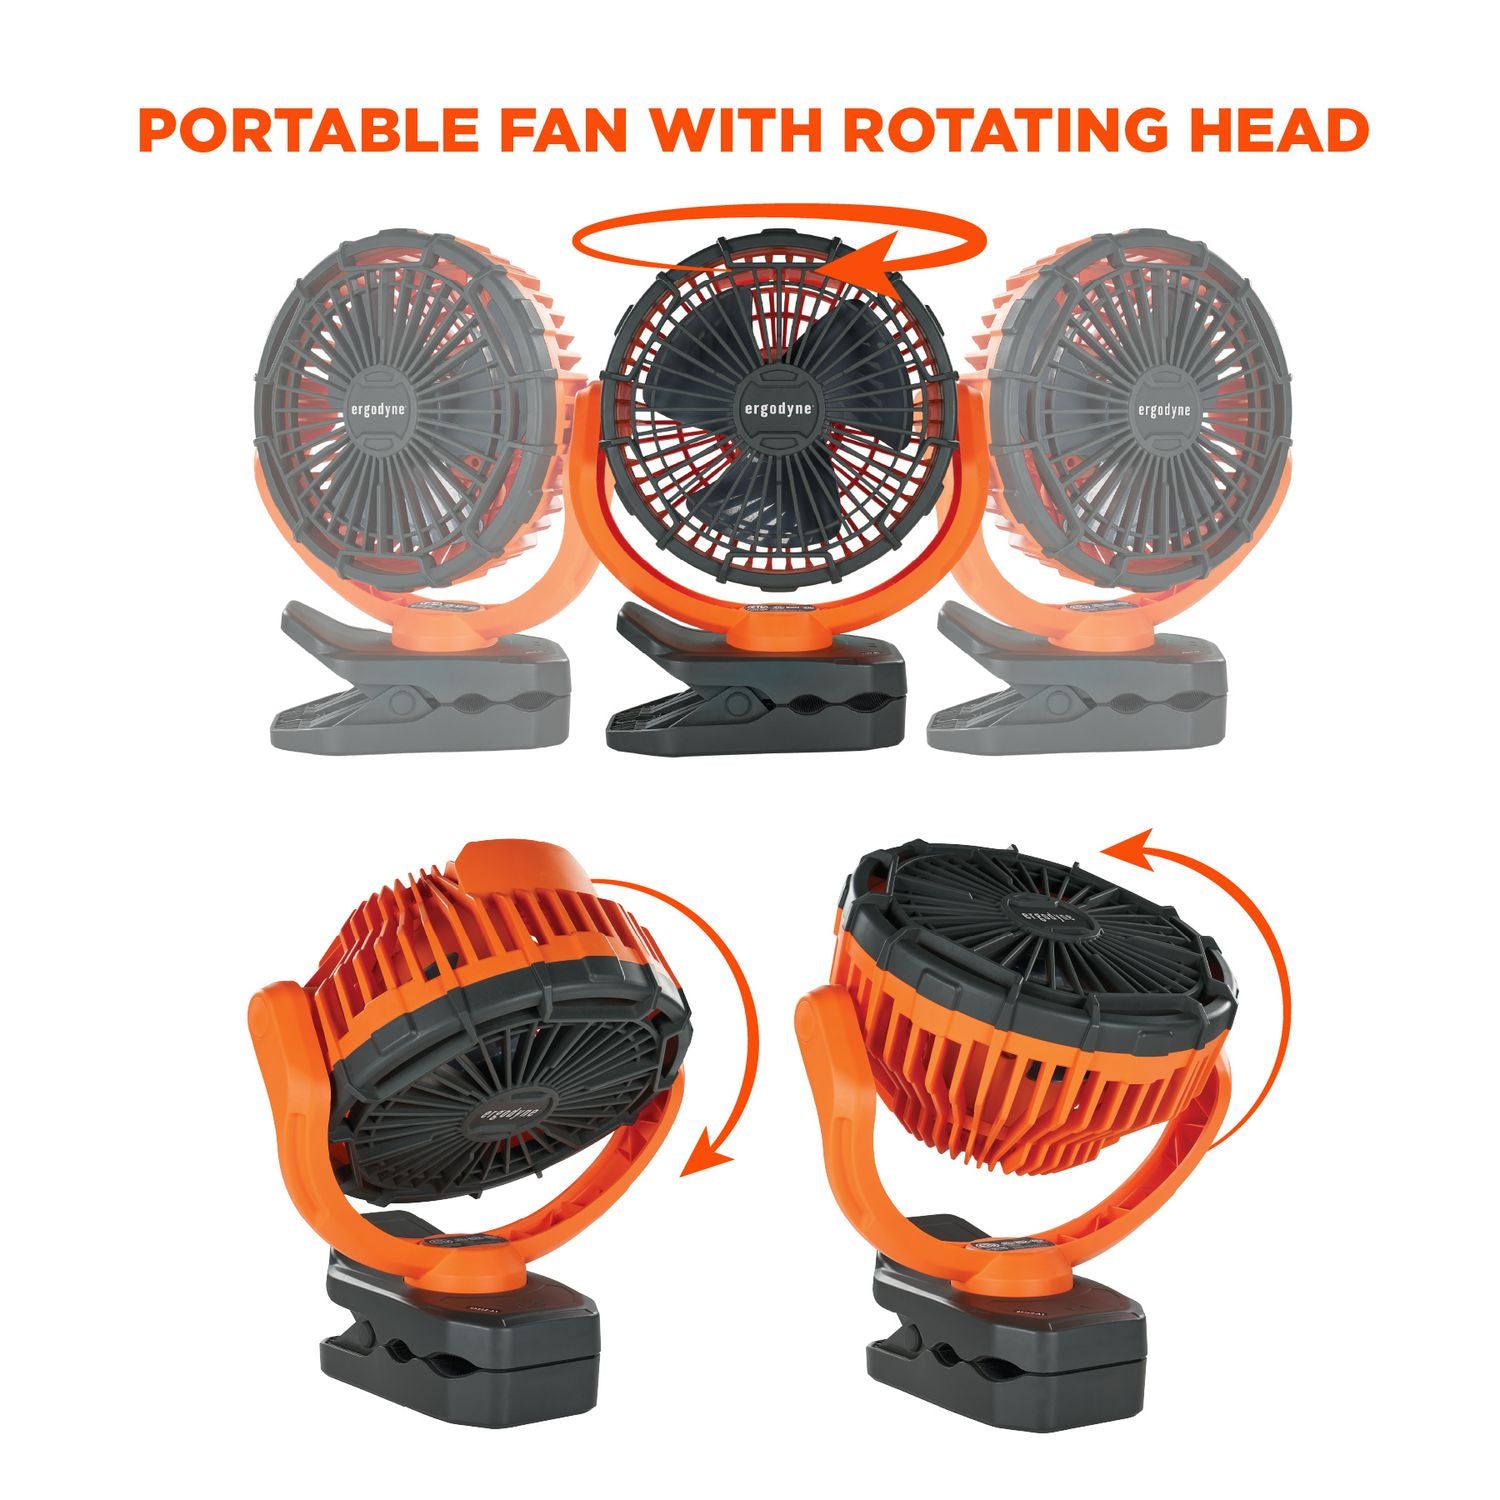 chill-its-6090-rechargeable-portable-jobsite-fan-95-orange-black-ships-in-1-3-business-days_ego12800 - 3